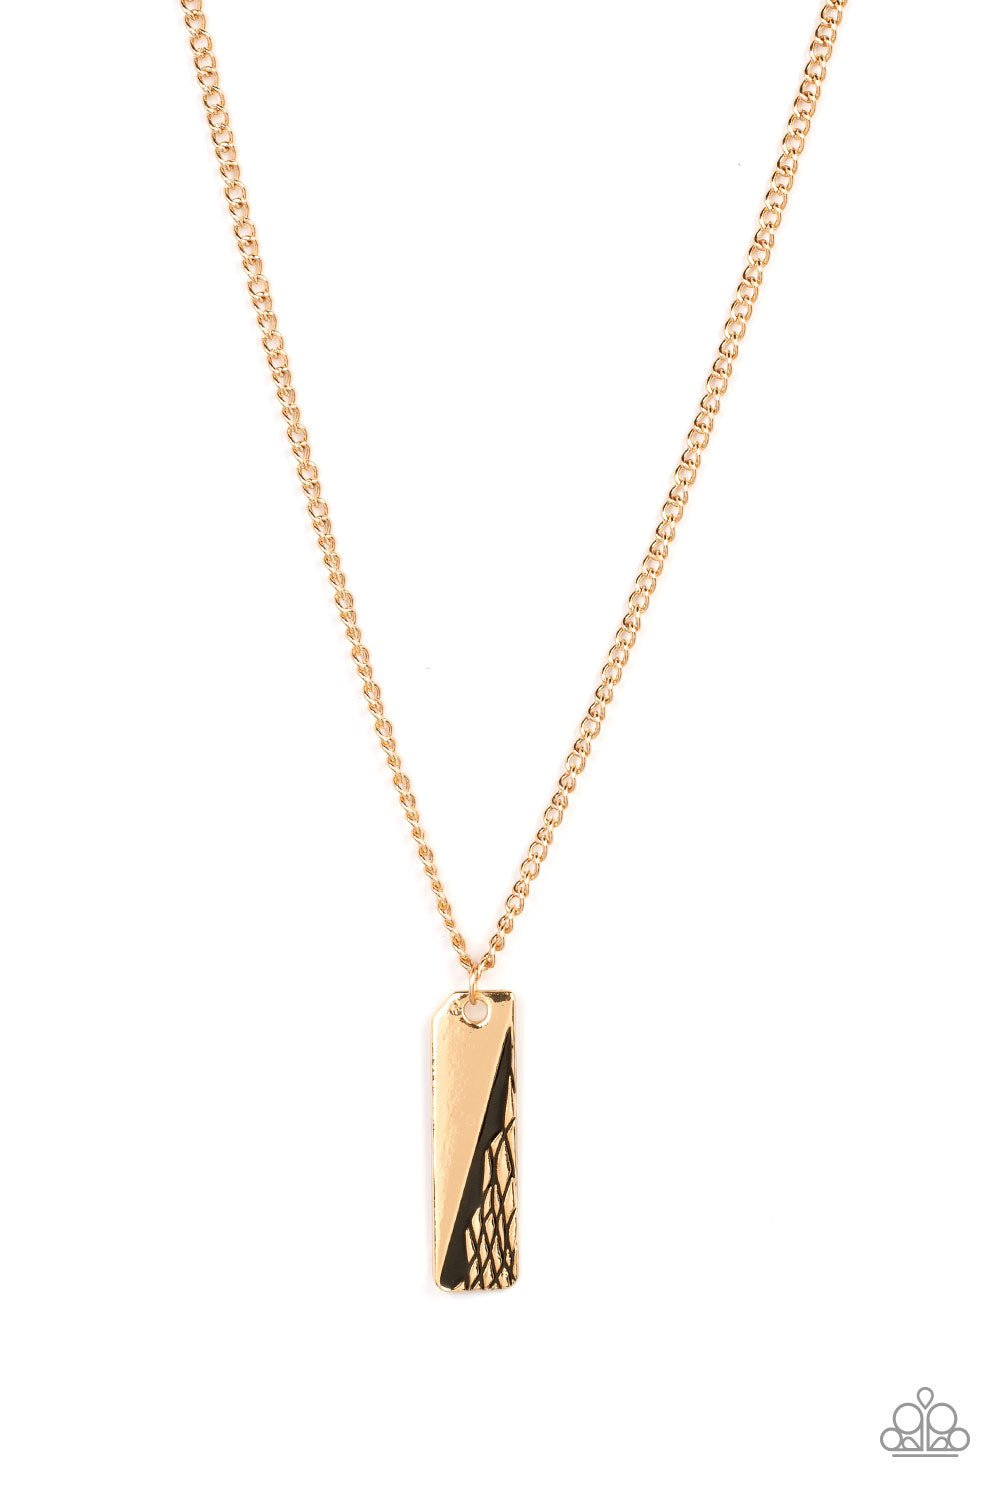 Tag Along Gold-Urban Necklace